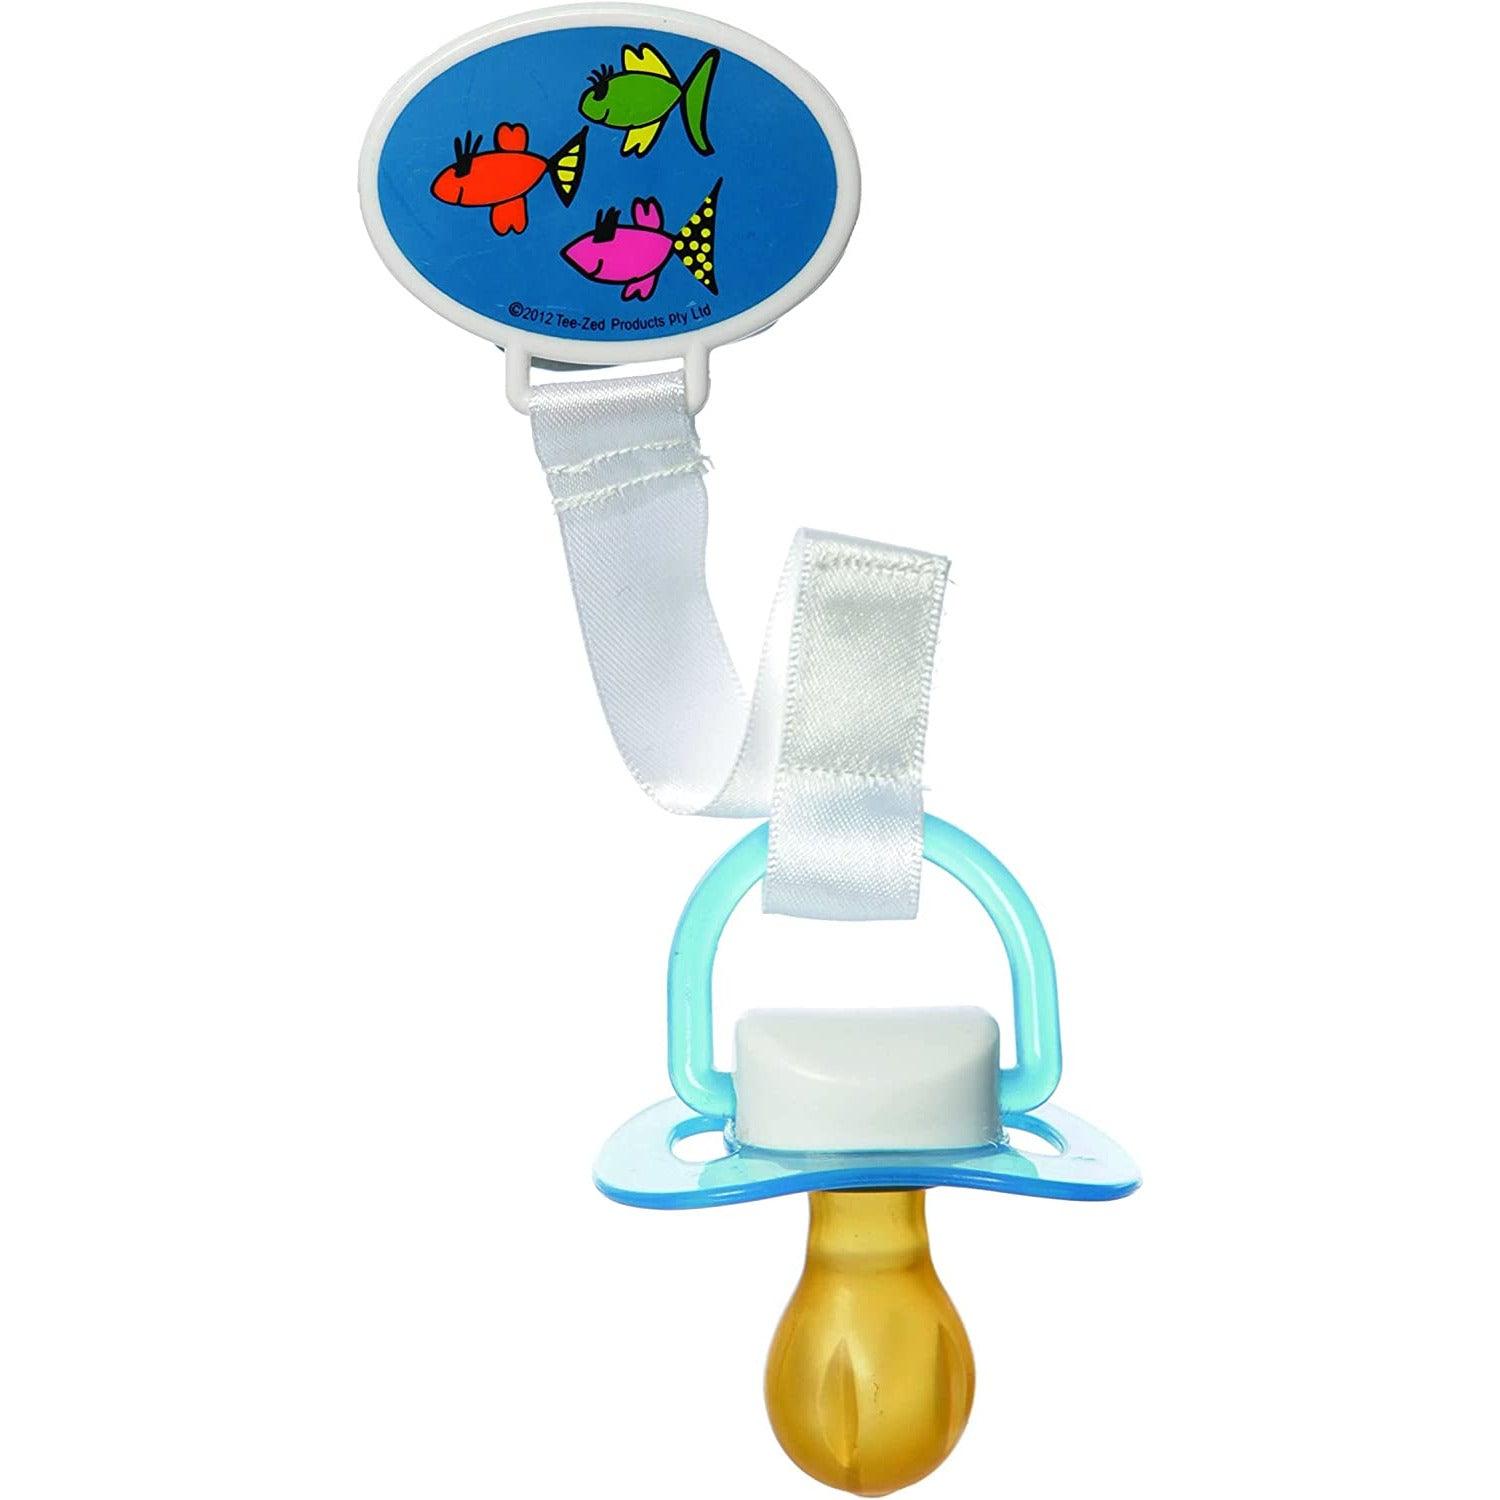 Dream Baby F419 Pacifier Holder Fish - BumbleToys - 0-24 Months, Baby Saftey & Health, Boys, Cecil, Girls